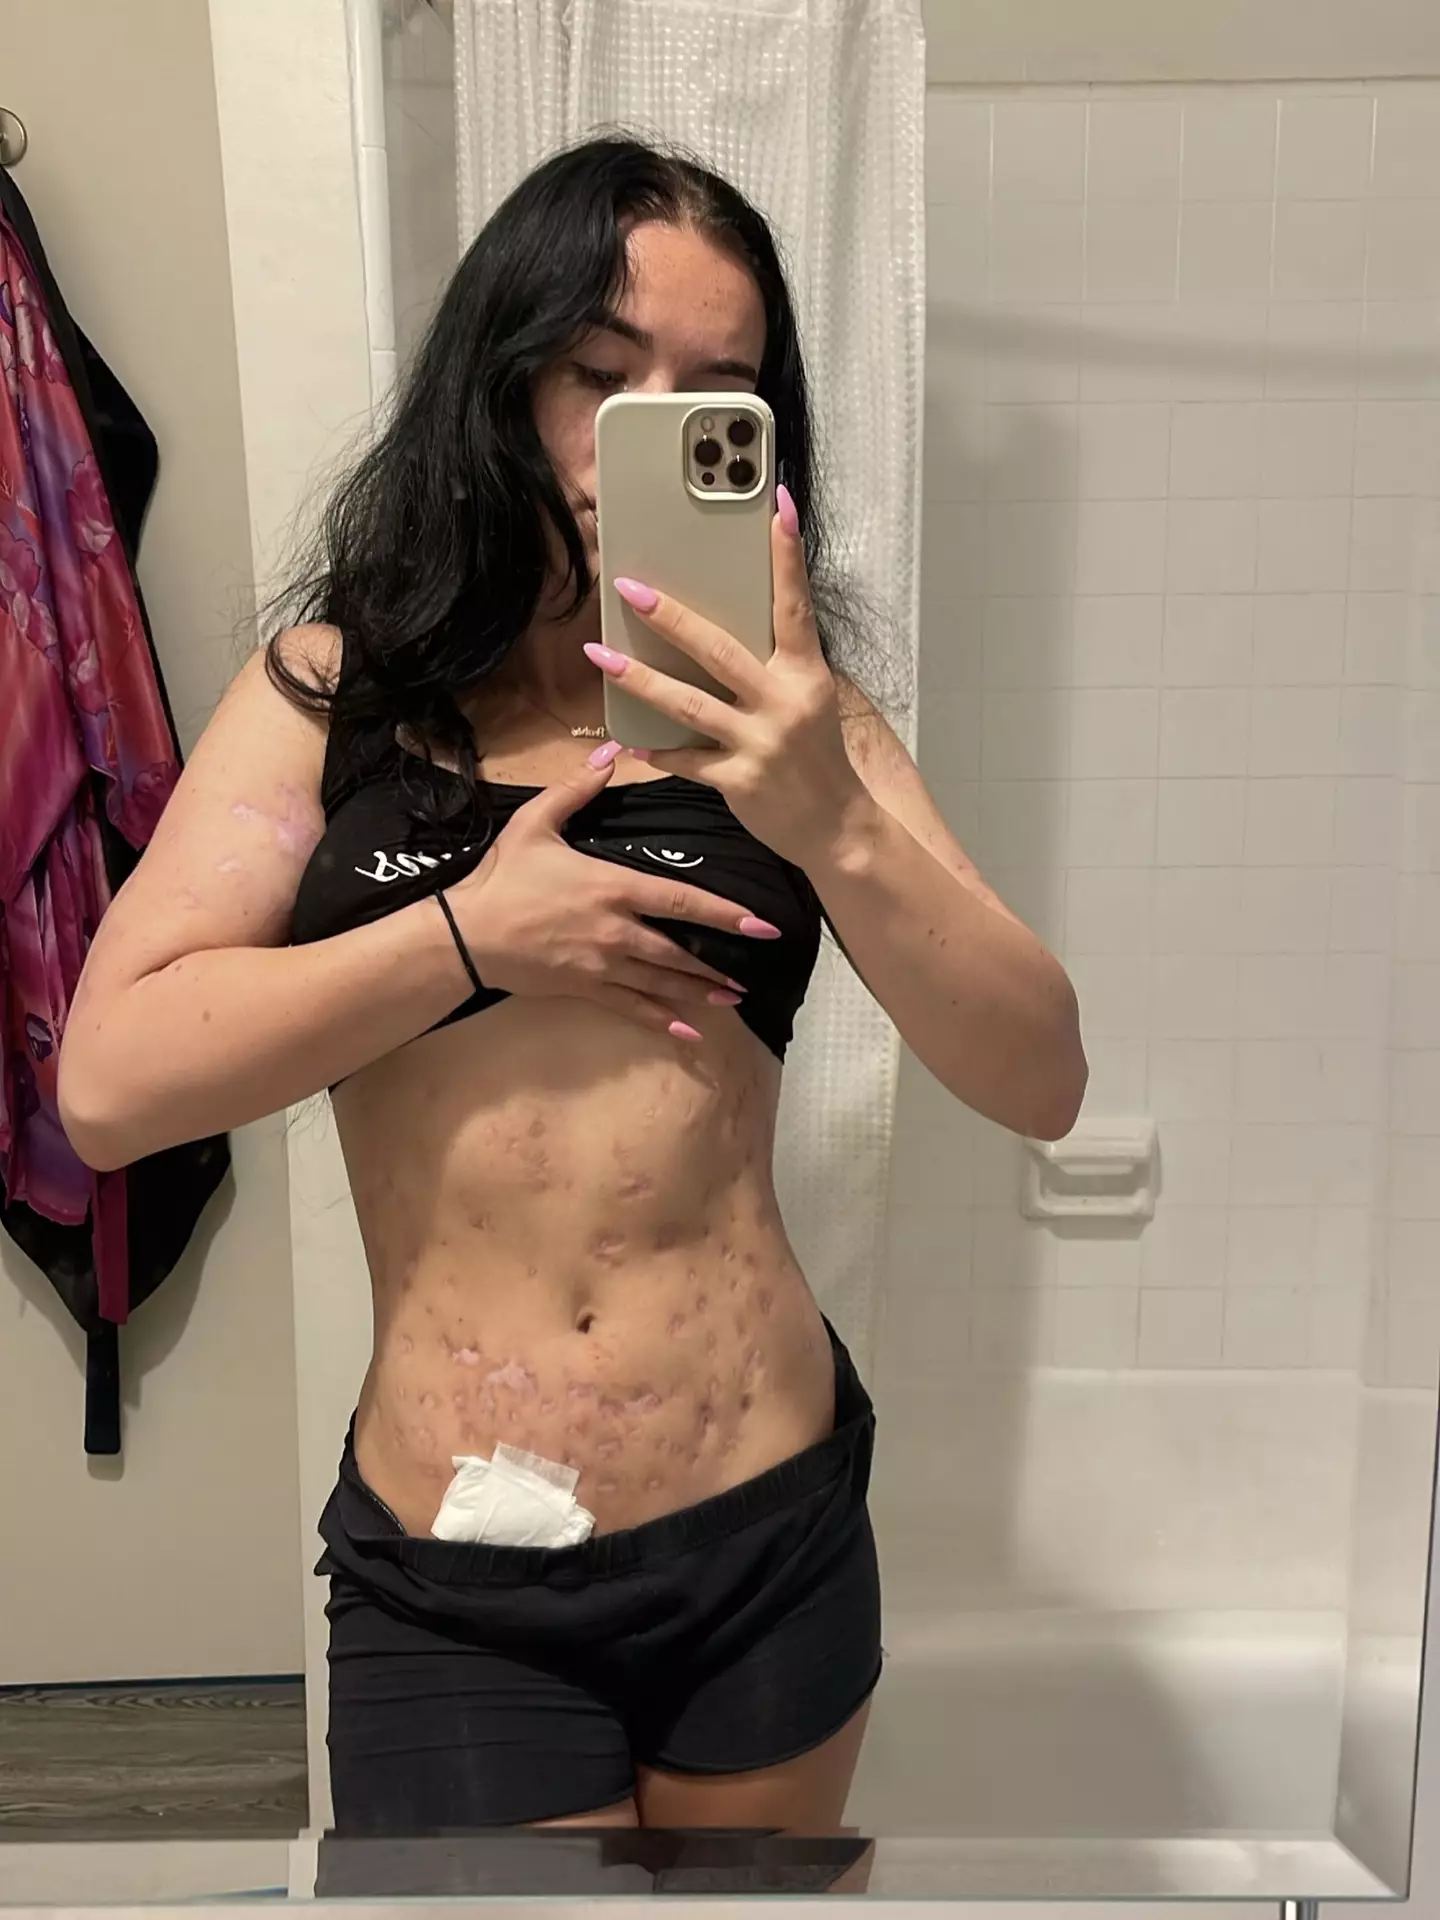 The fitness influencer feared she was going to die.